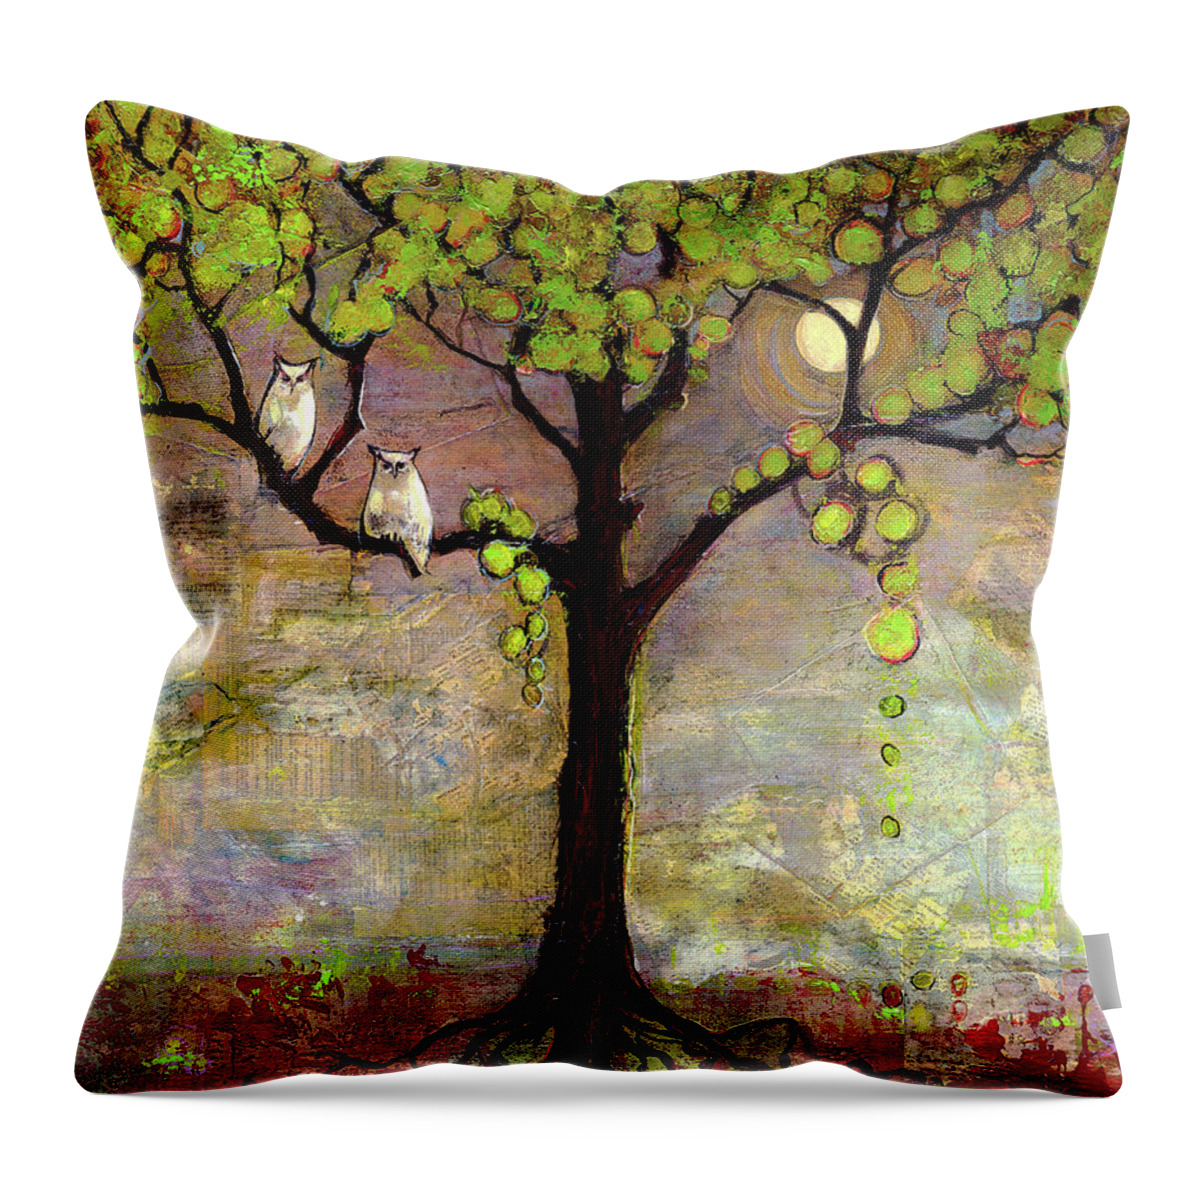 Owl Throw Pillow featuring the painting Moon River Tree Owls by Blenda Studio